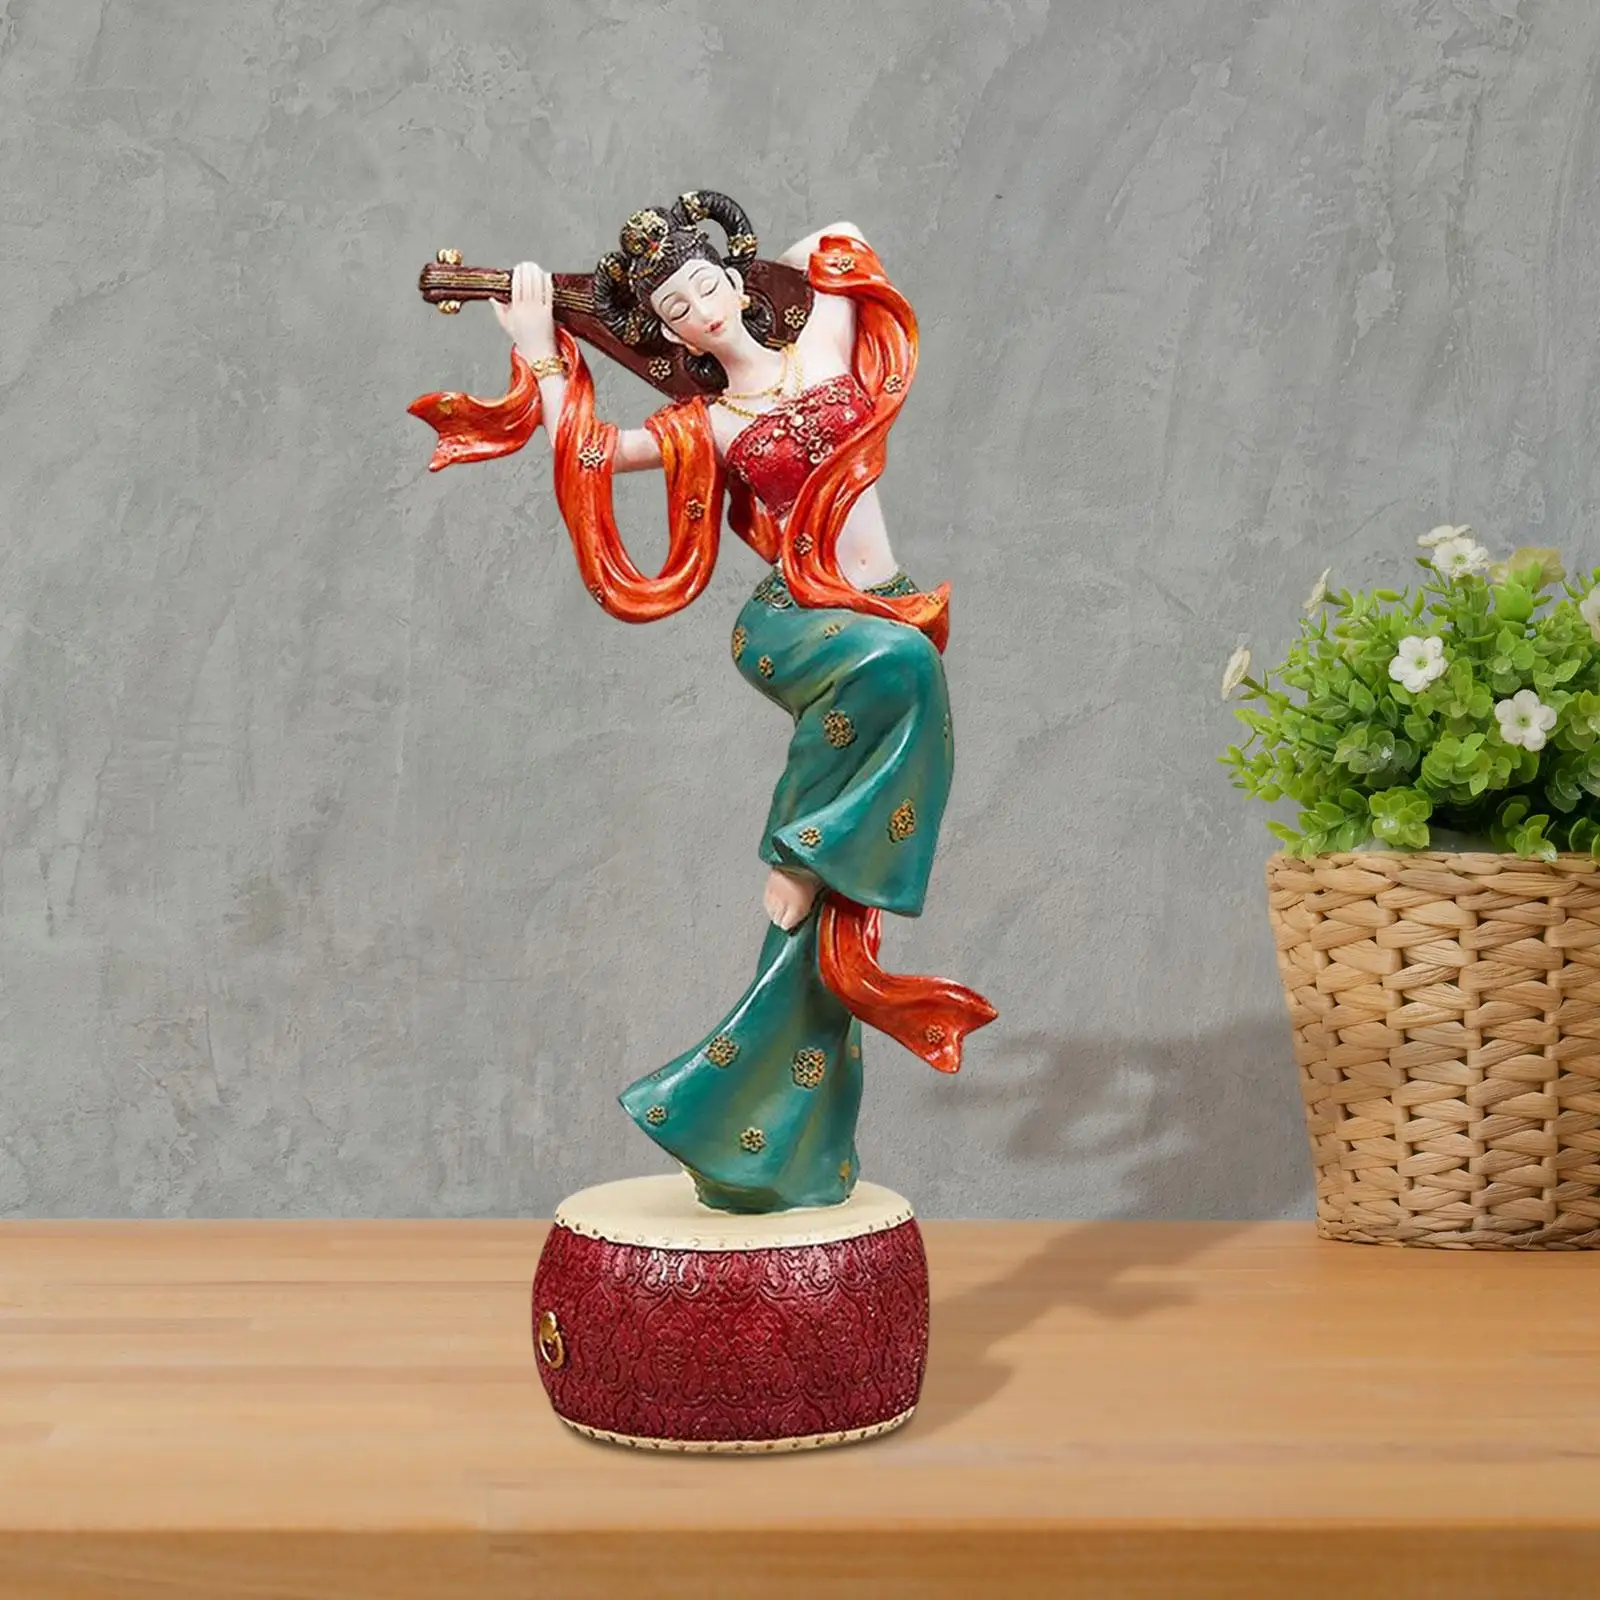 Dunhuang Flying Fairy Statue Figurine Art Crafts Flying Lady God Sculpture